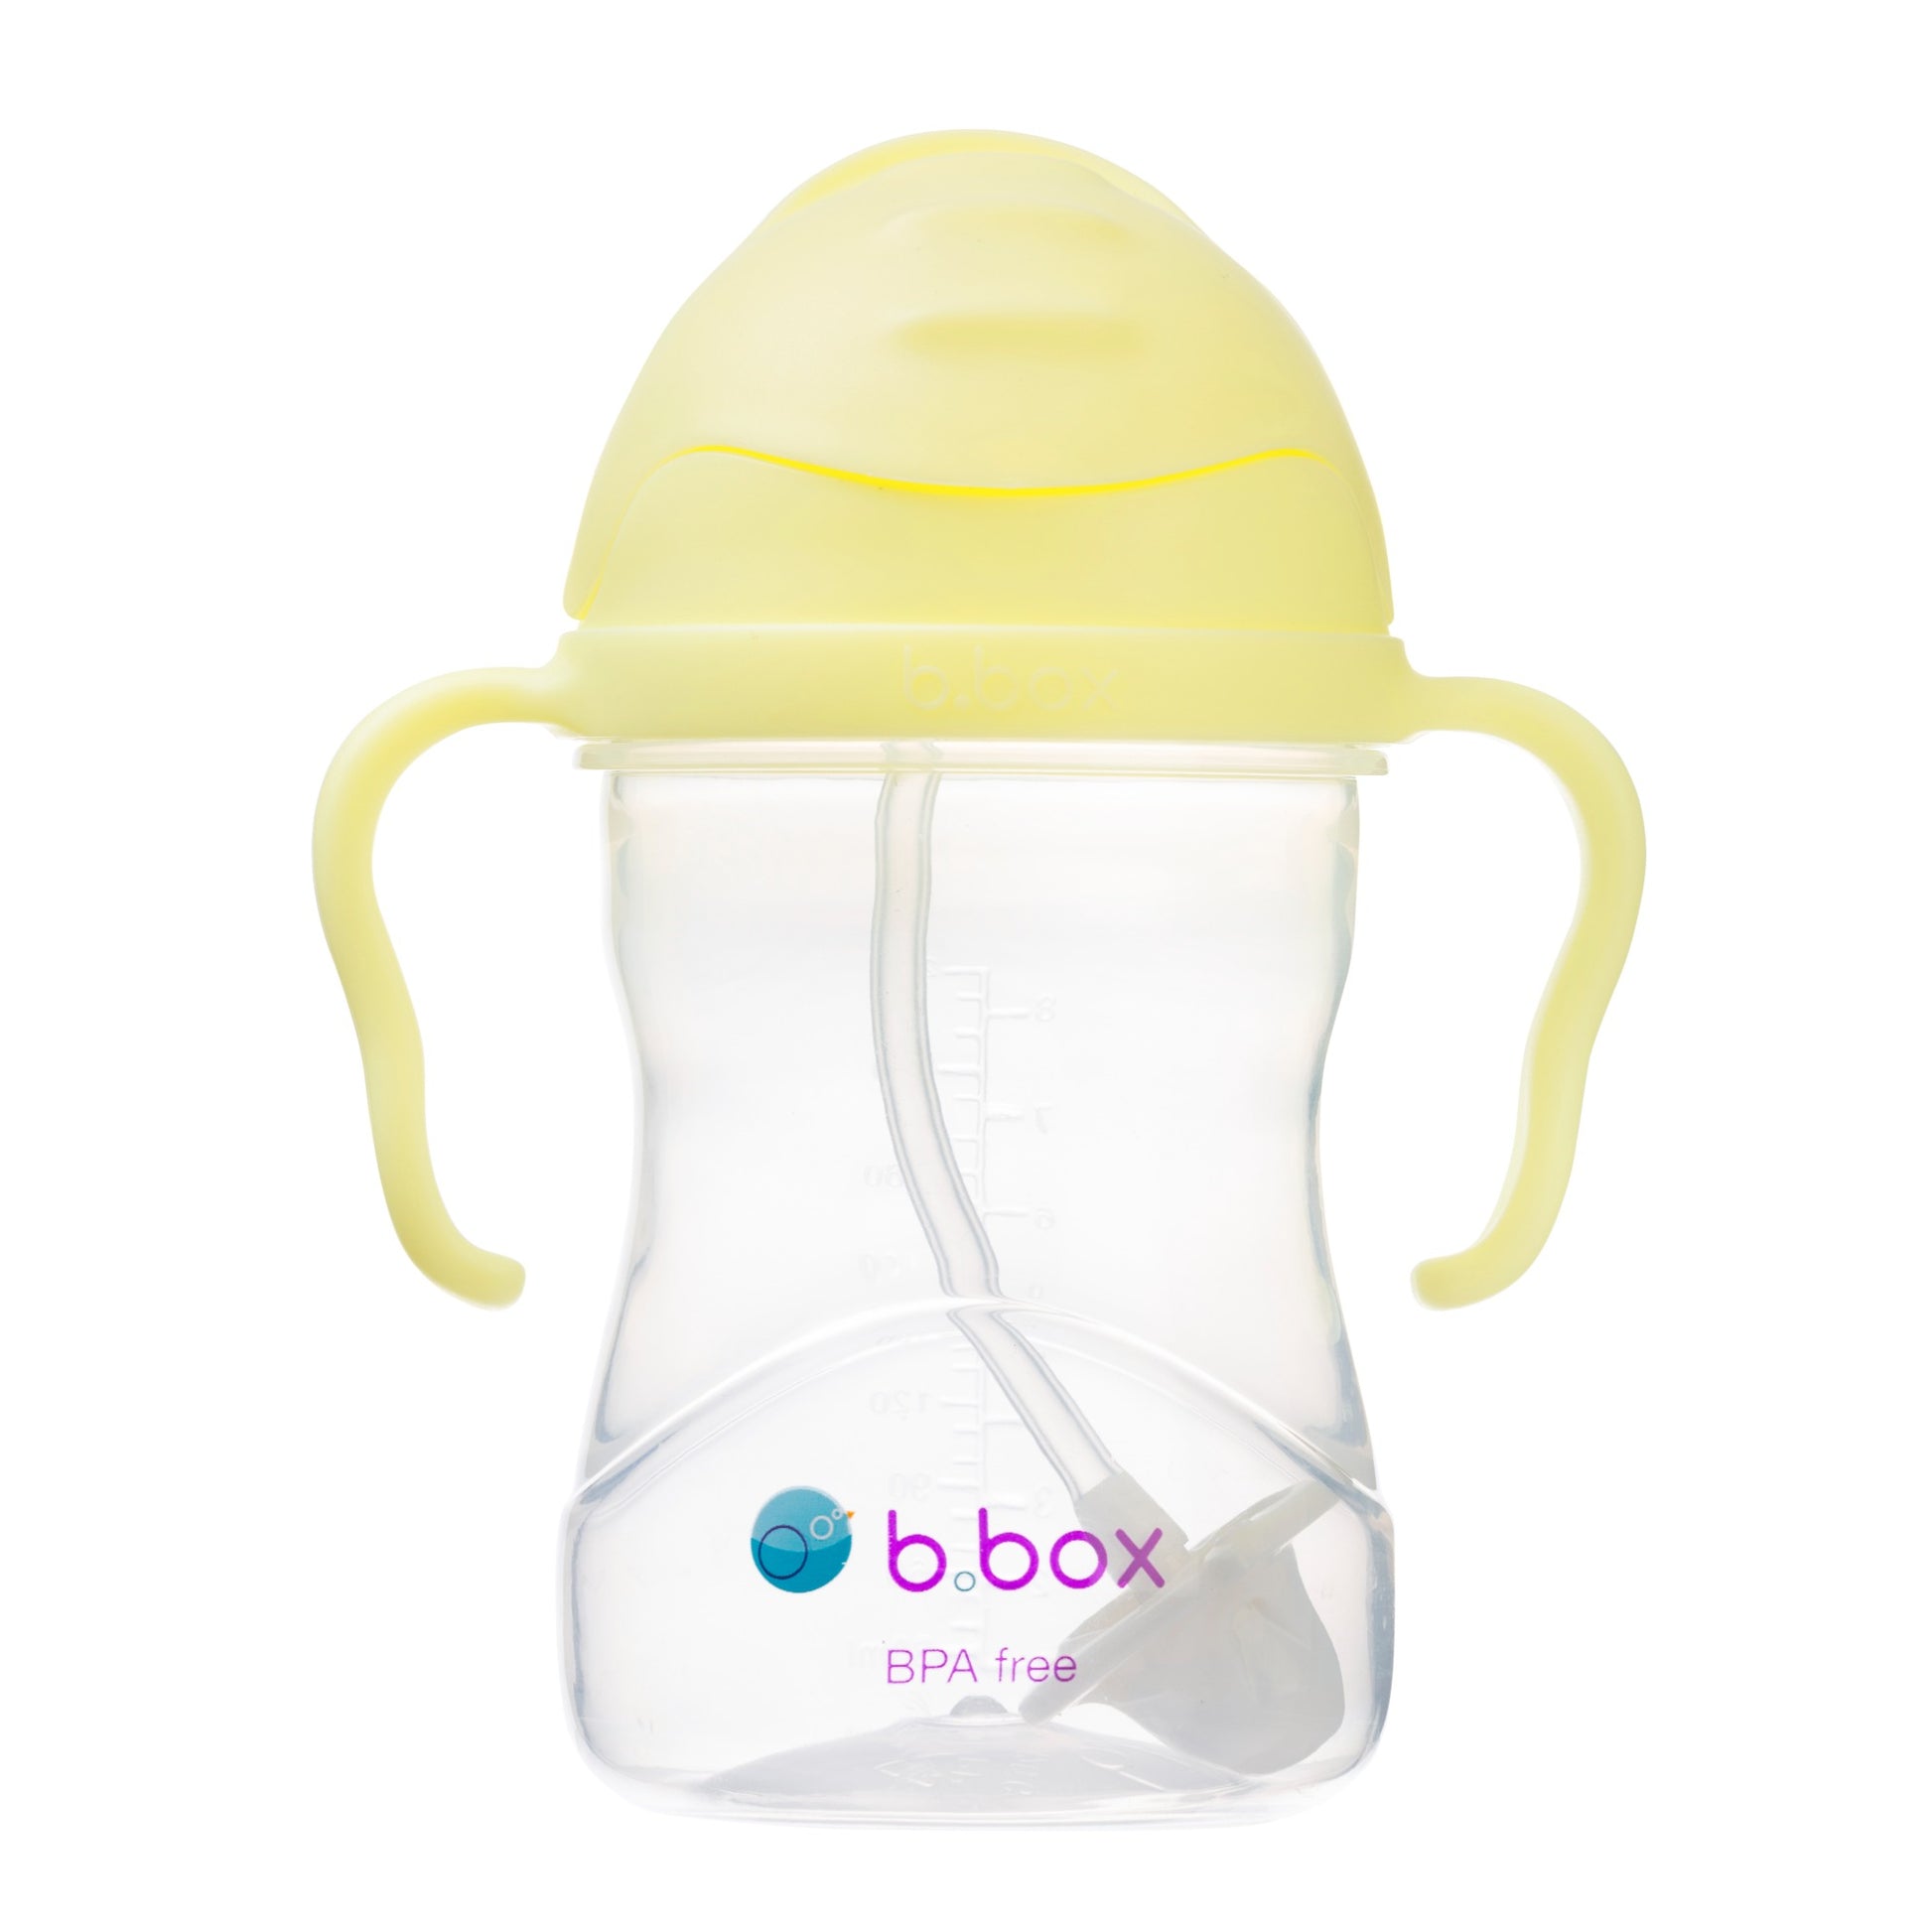 b.box Sippy Cup in Banana Split available at Bear & Moo